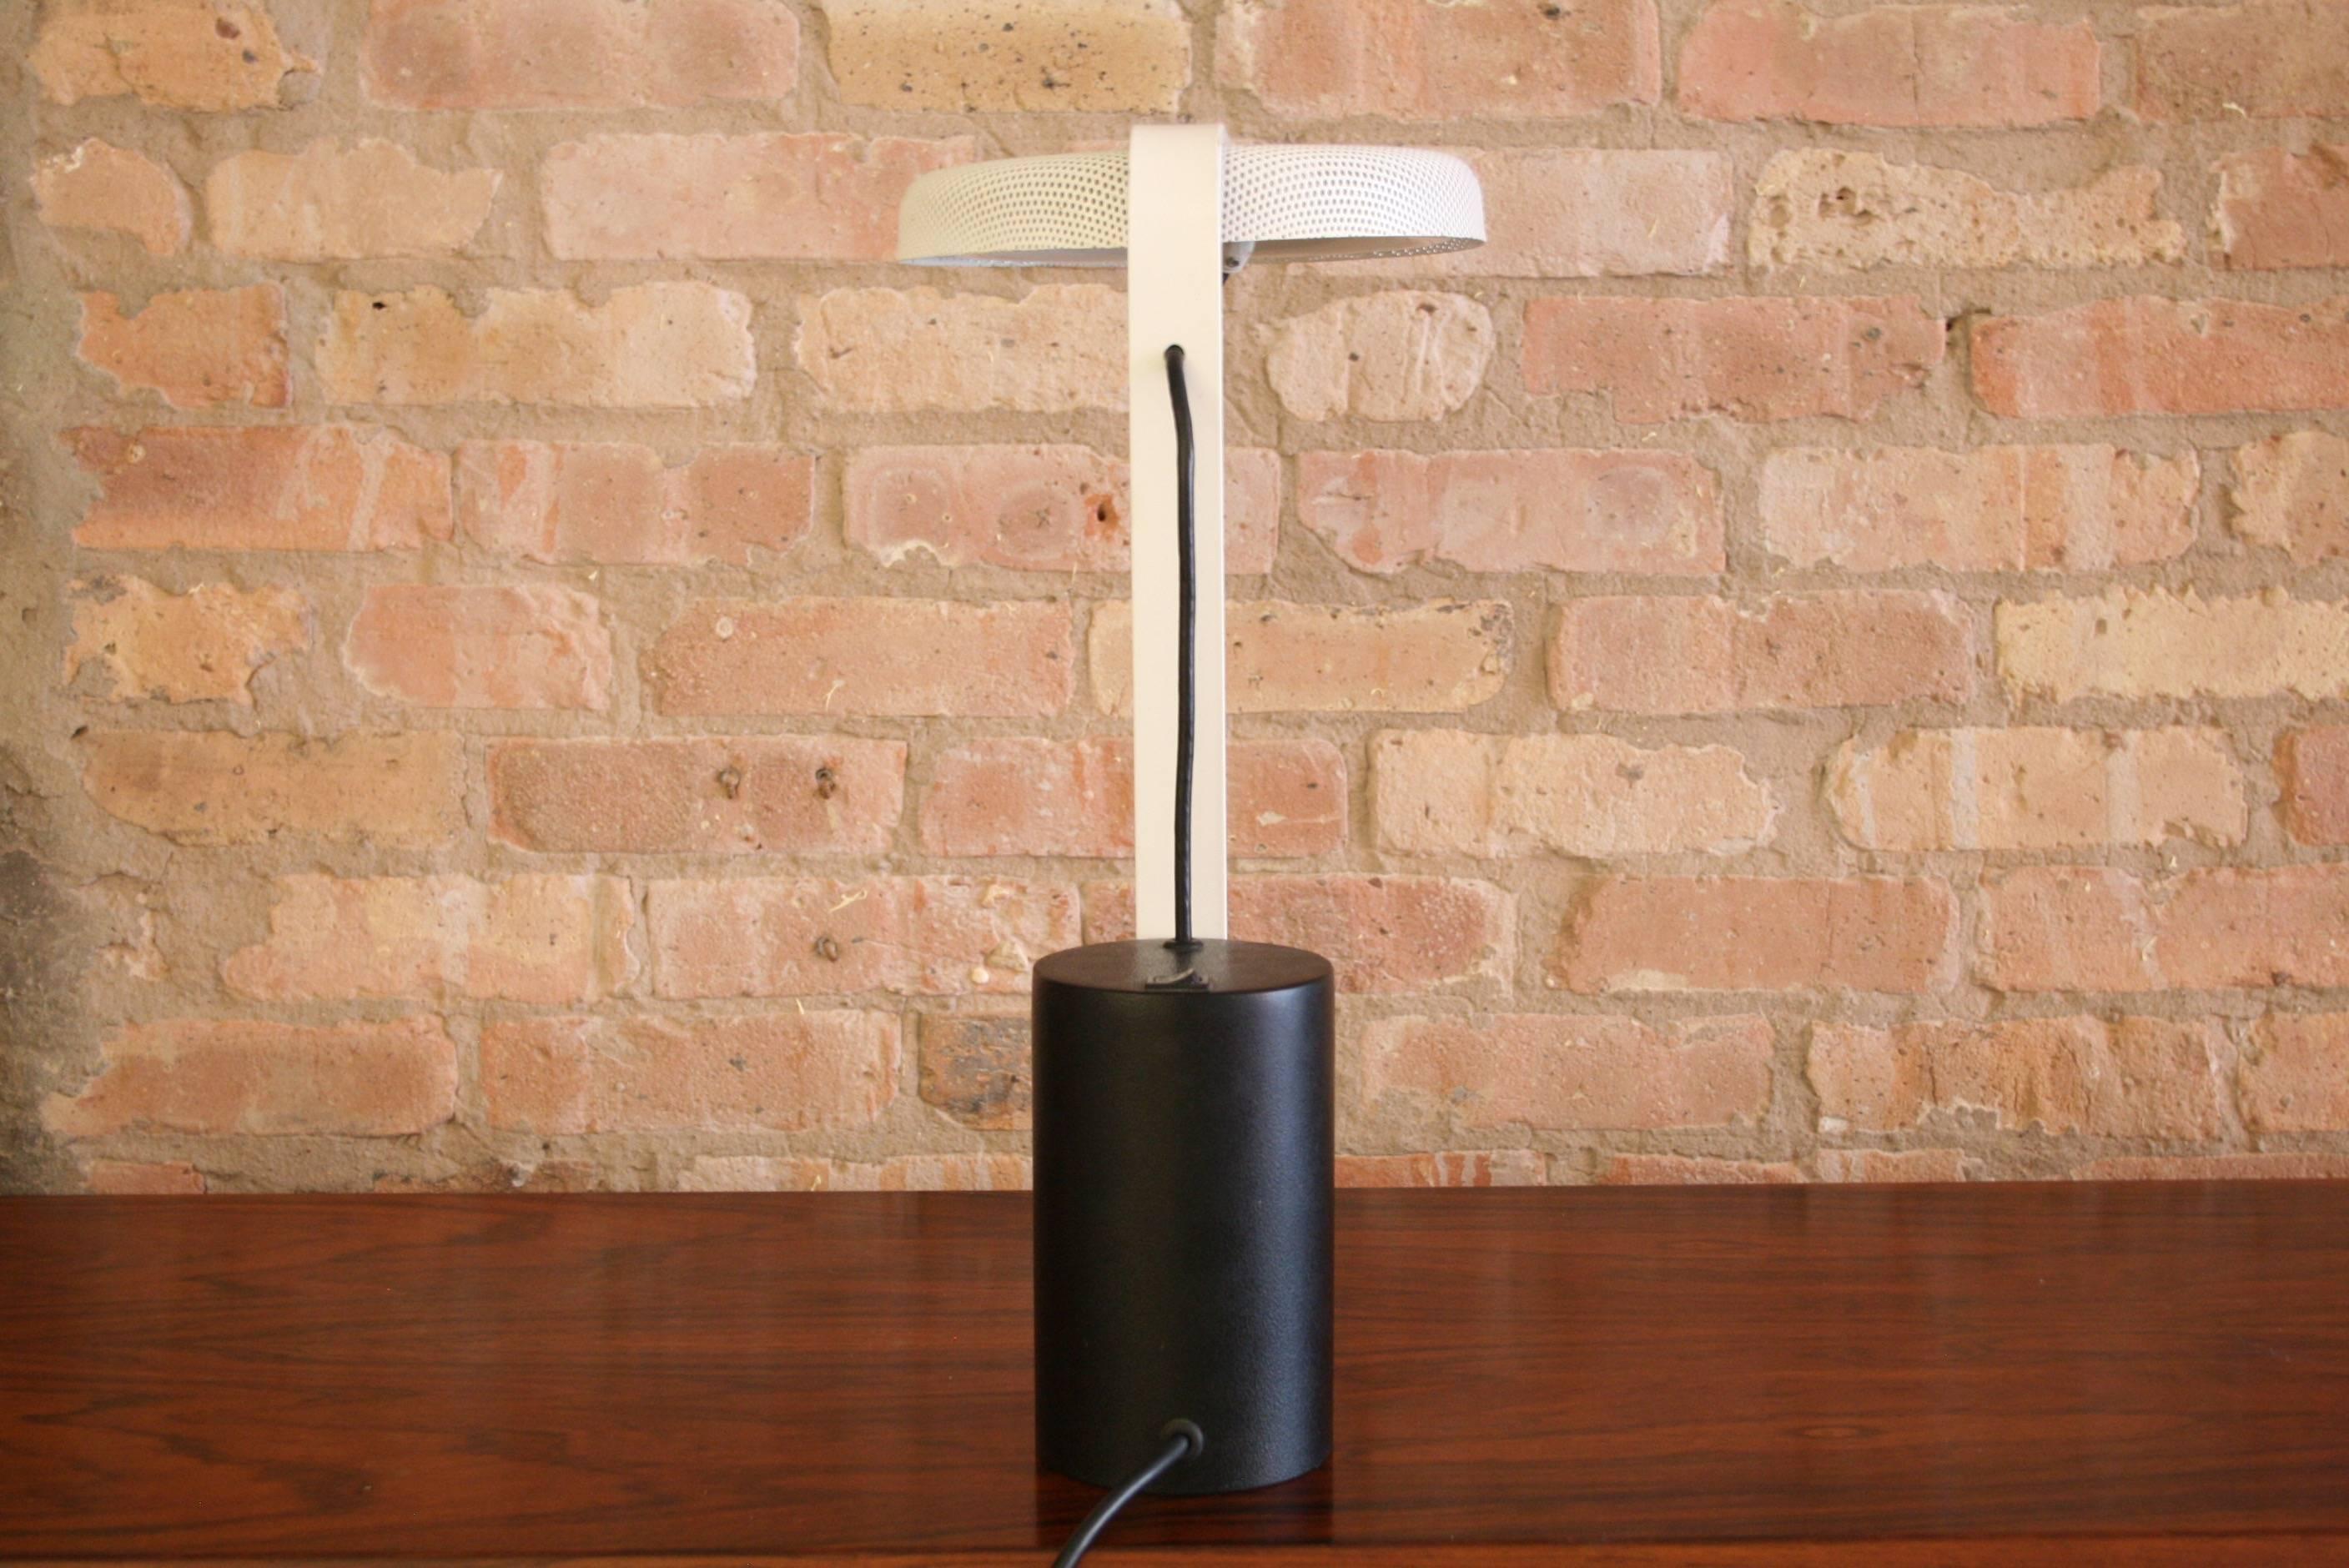 Ron Rezek black and white 110 Table Lamp. Rare fluorescent desk lamp with white enameled metal perforated shade and black cylindrical base. Utilizes 6 inch circular fluorescent bulb.